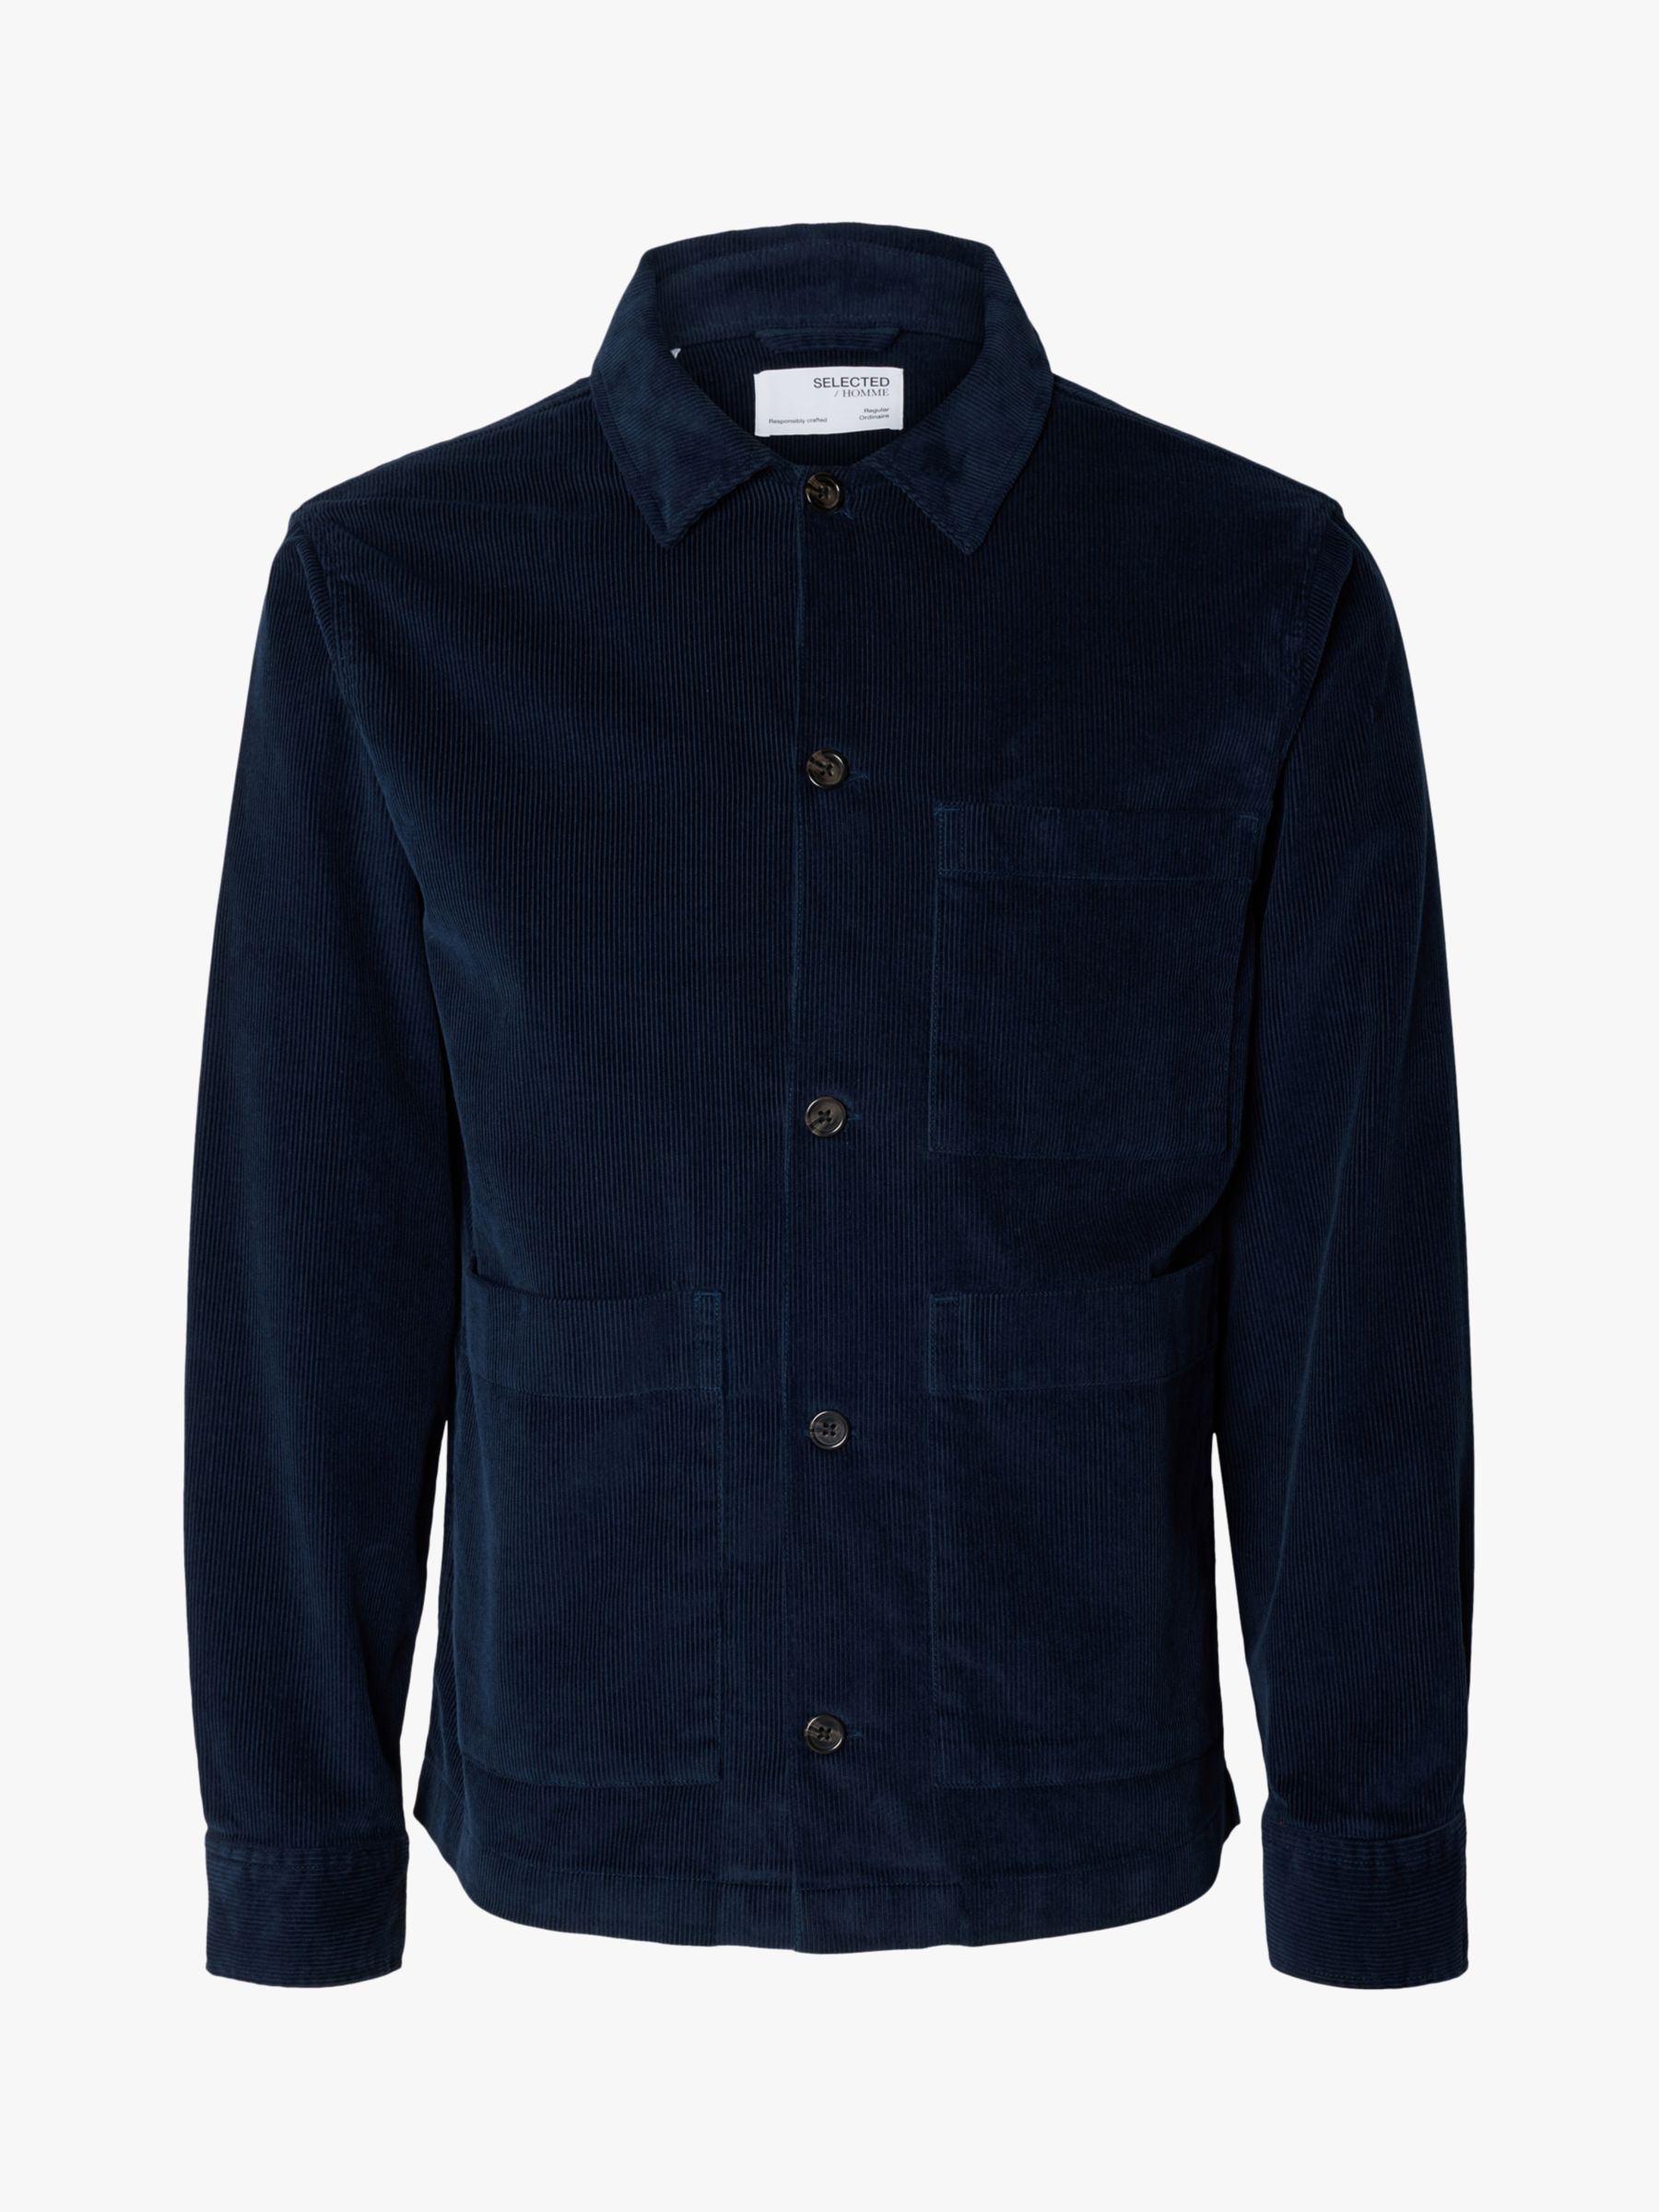 SELECTED HOMME Tony Recycled Cotton Corduroy Shirt, Navy at John Lewis ...